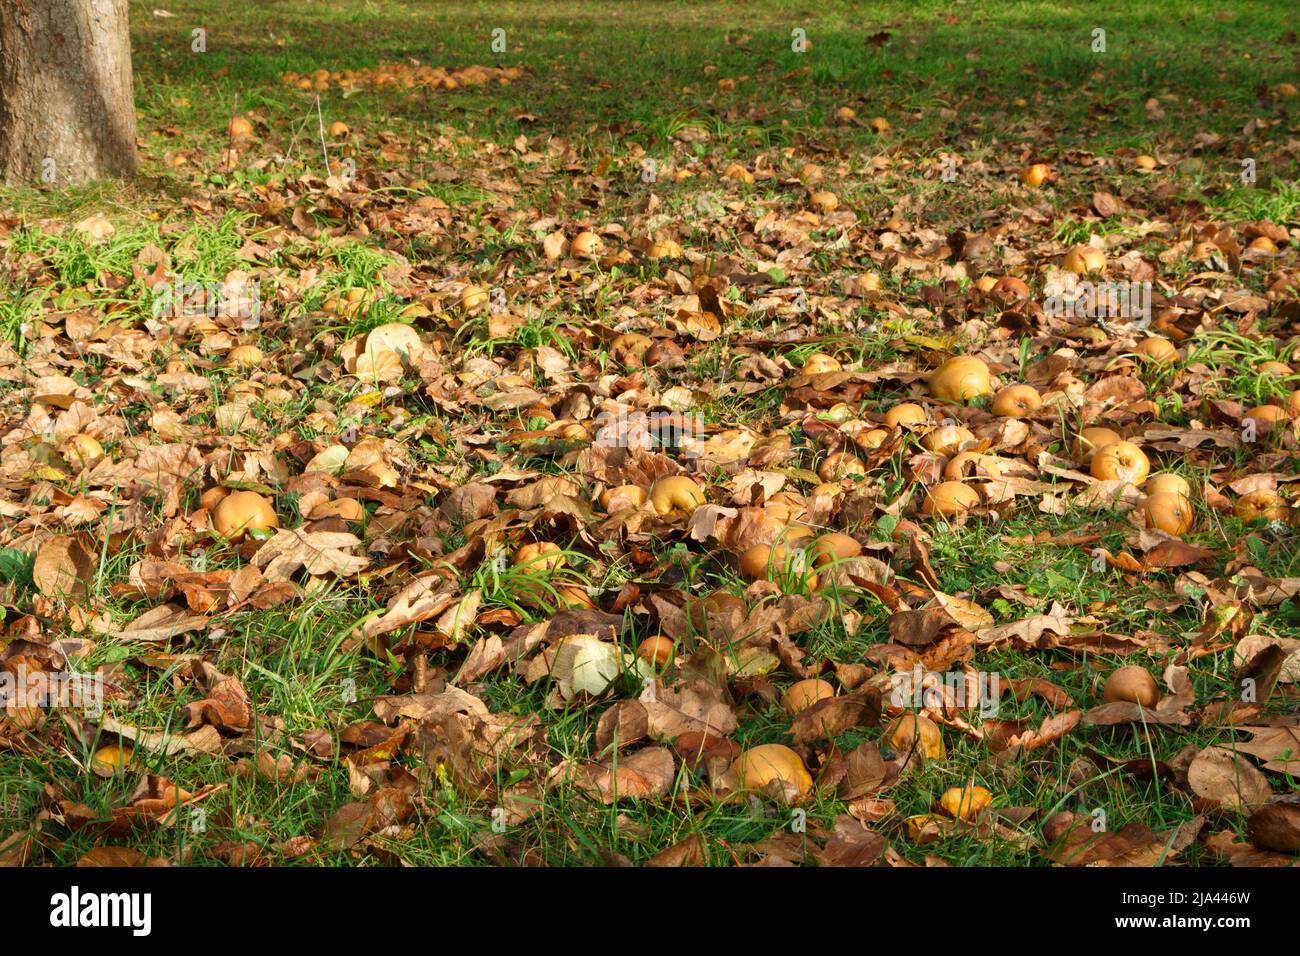 Apples between dead leaves on the ground in an orchard during autumn Stock Photo